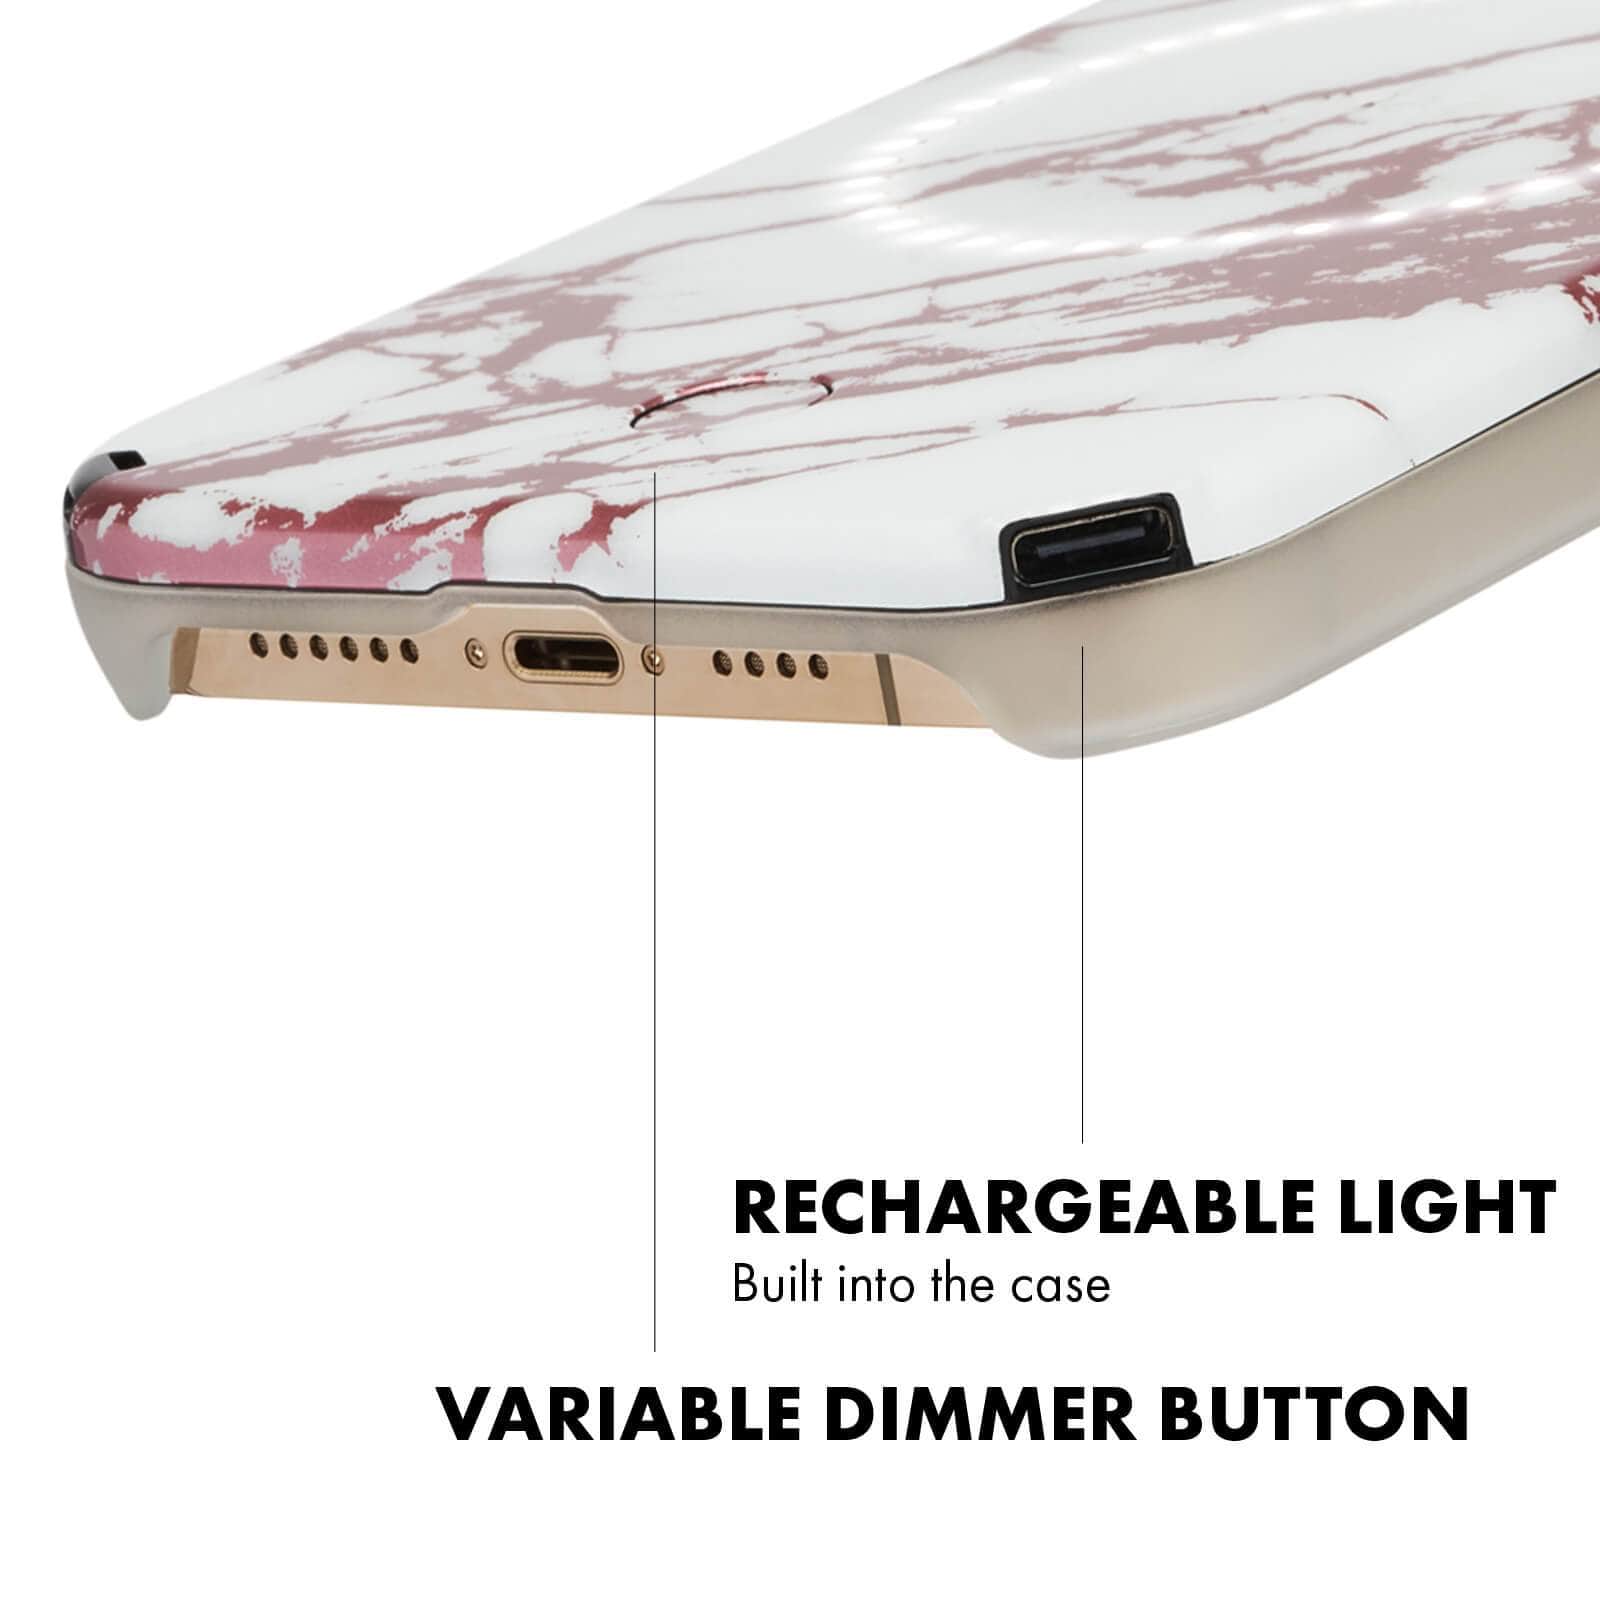 RECHARGEABLE LIGHT BUILT INTO THE CASE, VARIABLE DIMMER BUTTON color::Rose Metallic White Marble